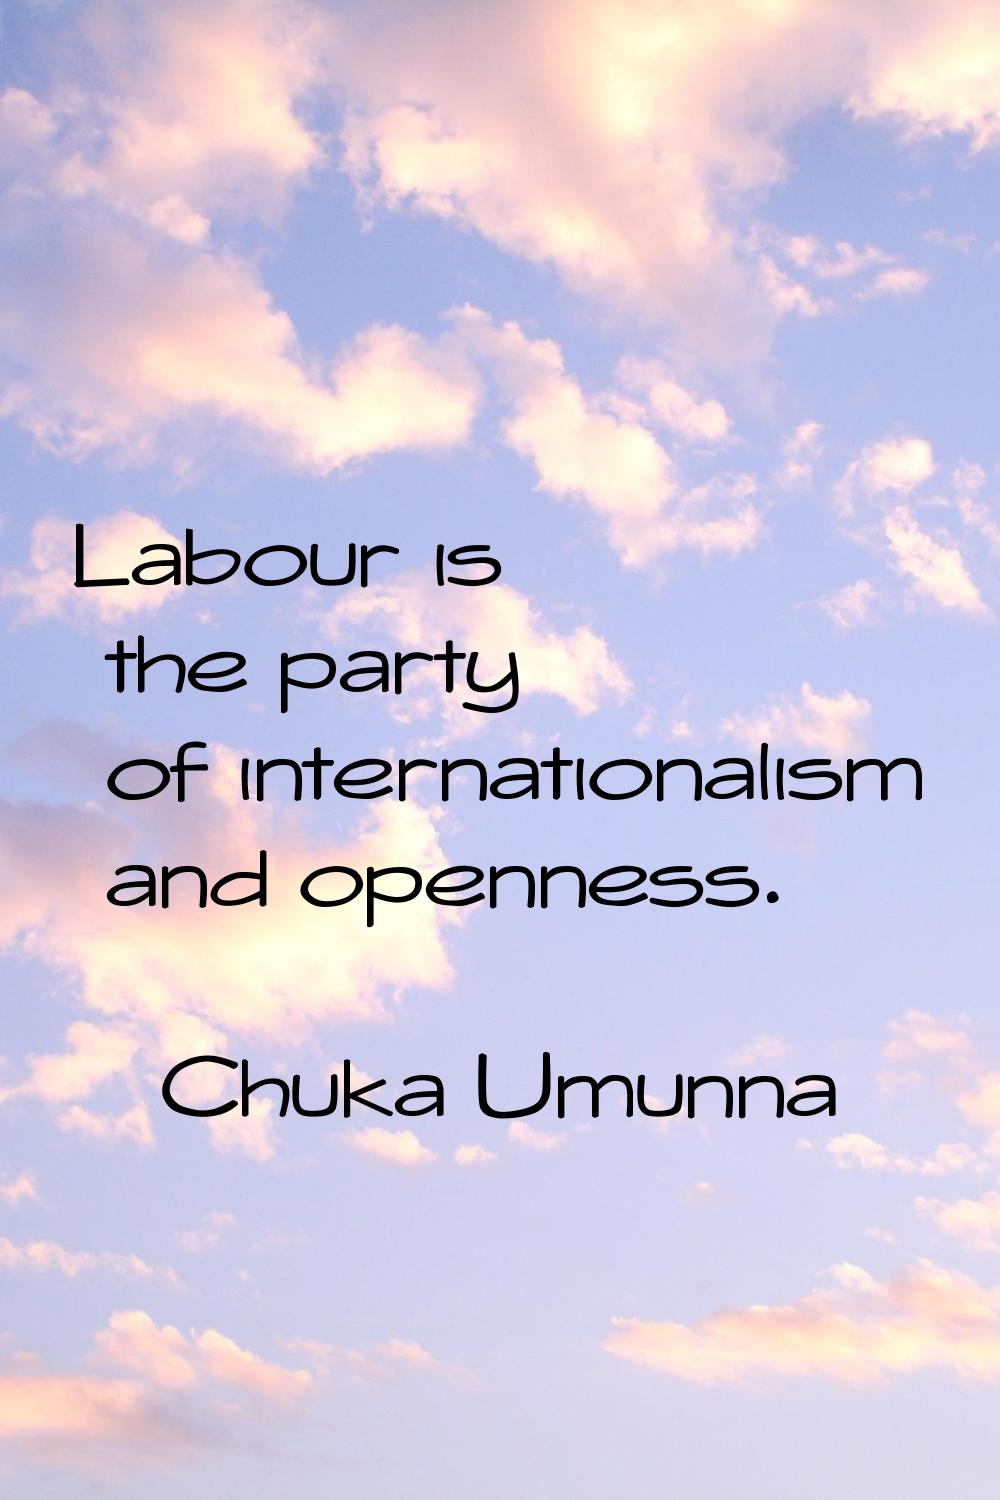 Labour is the party of internationalism and openness.